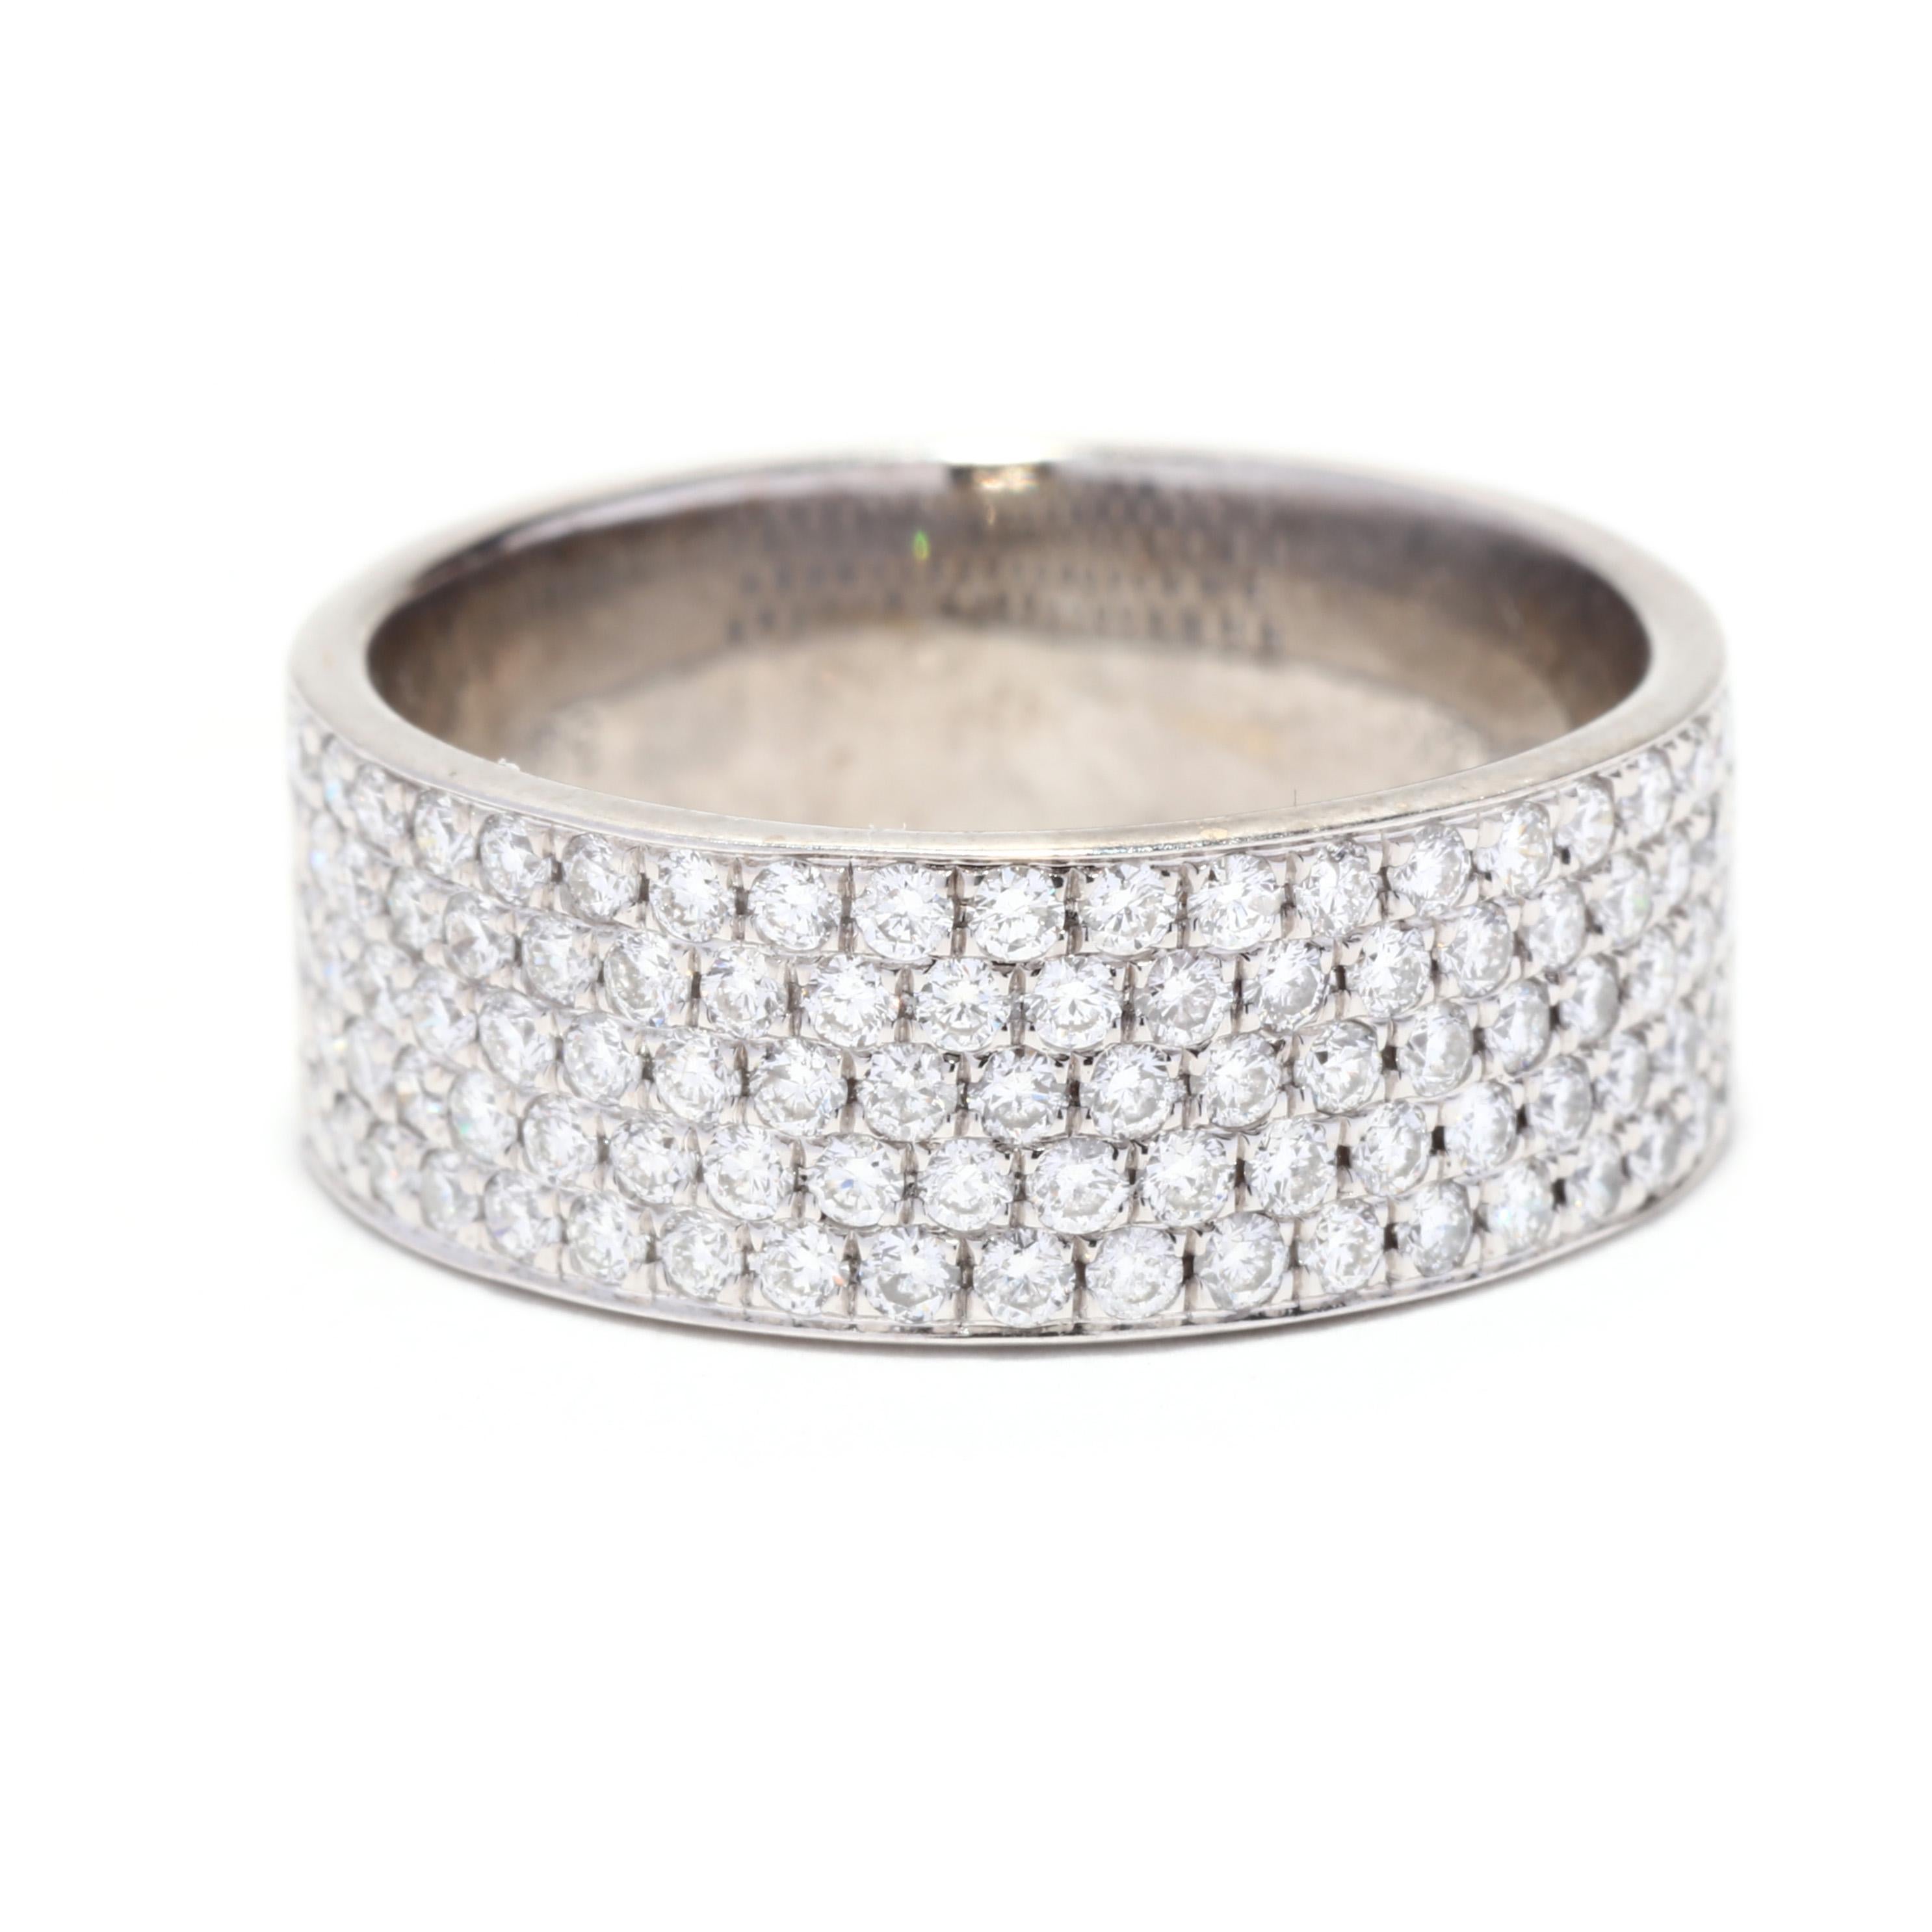 A 14 karat white gold wide pavé diamond band. This wide wedding band features a flat wide band design with pavé set, round brilliant cut diamonds weighing approximately 1.10 total carats and with a straight band.

Stones:
- diamonds, 93 stones
-